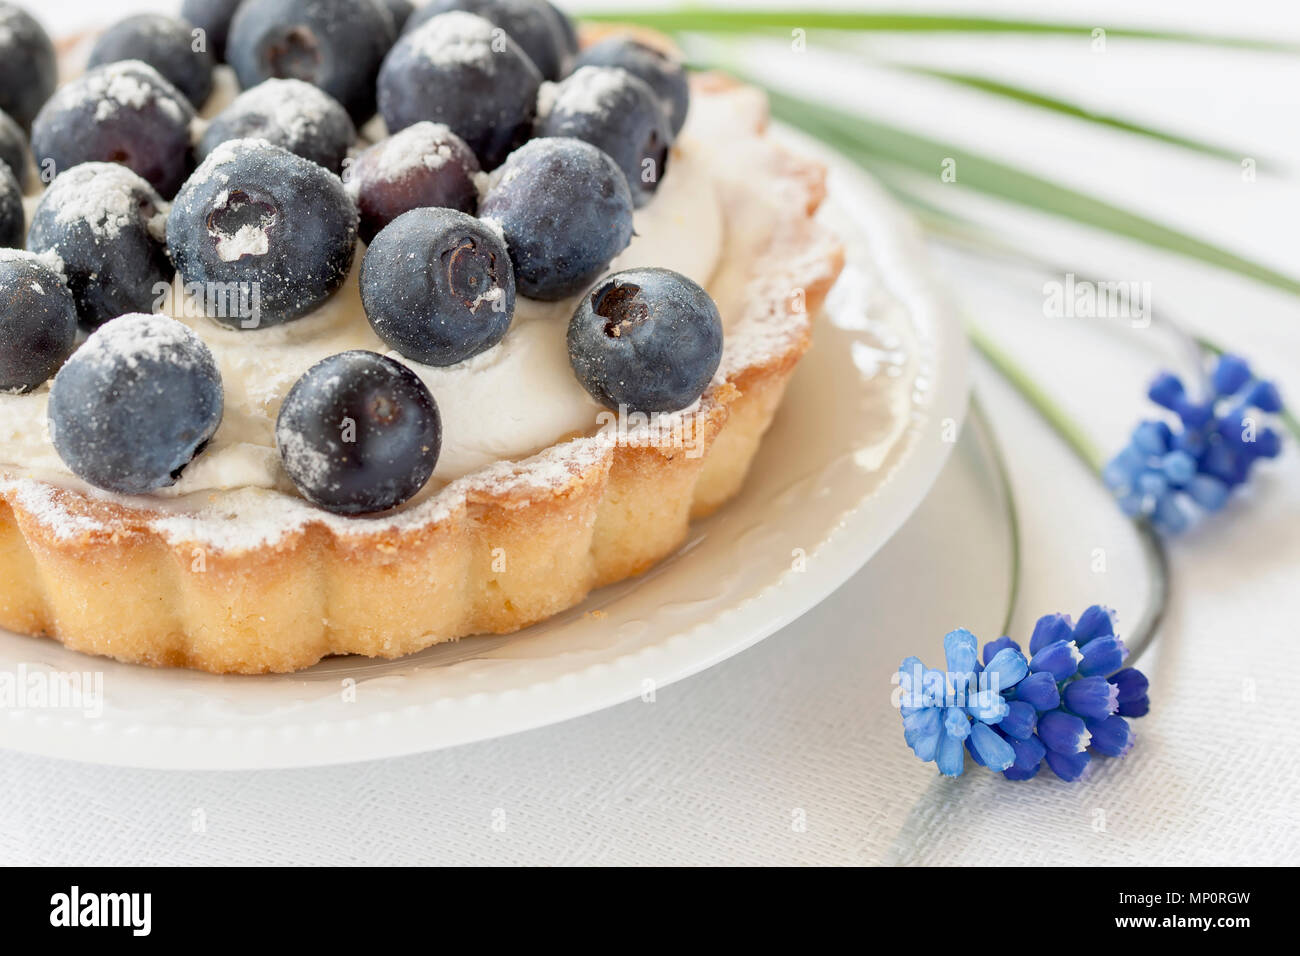 Fresh blueberry tart with vanilla custard in portion plate close-up, next to elegant blue flowers. Delicious and romantic summer berry dessert. Stock Photo